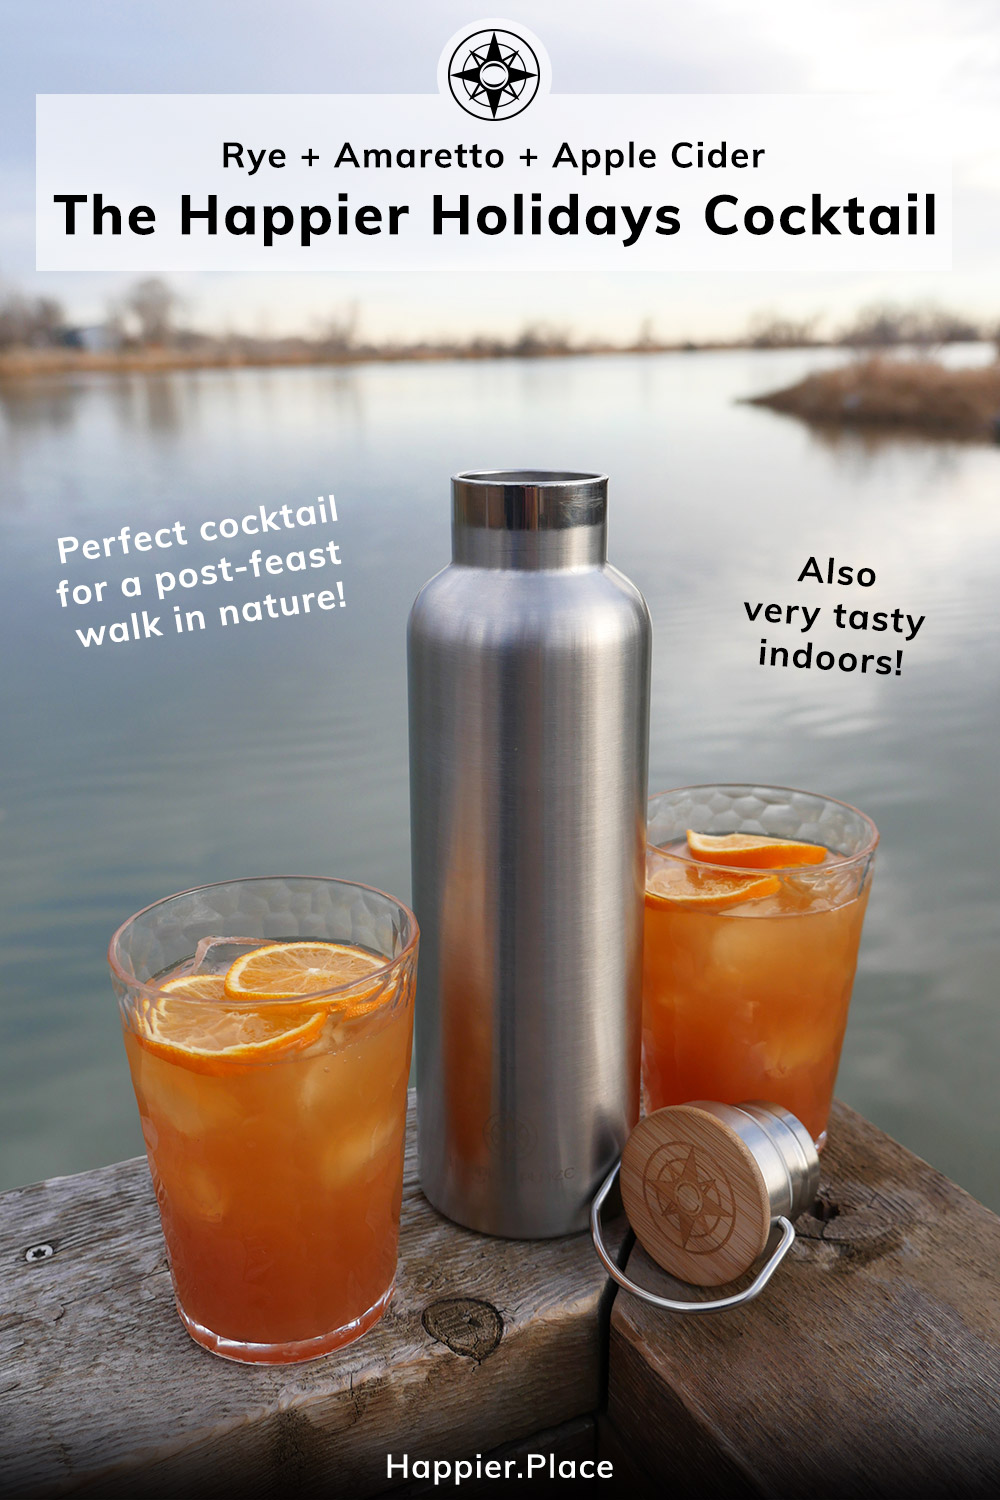 Happier Holidays Cocktai, rye, amaretto, apple cider, ideal cocktail for post-feast walk in nature, also delicious indoors, Happier Place stainless steel bottle and cocktails on Colorado autumn lake